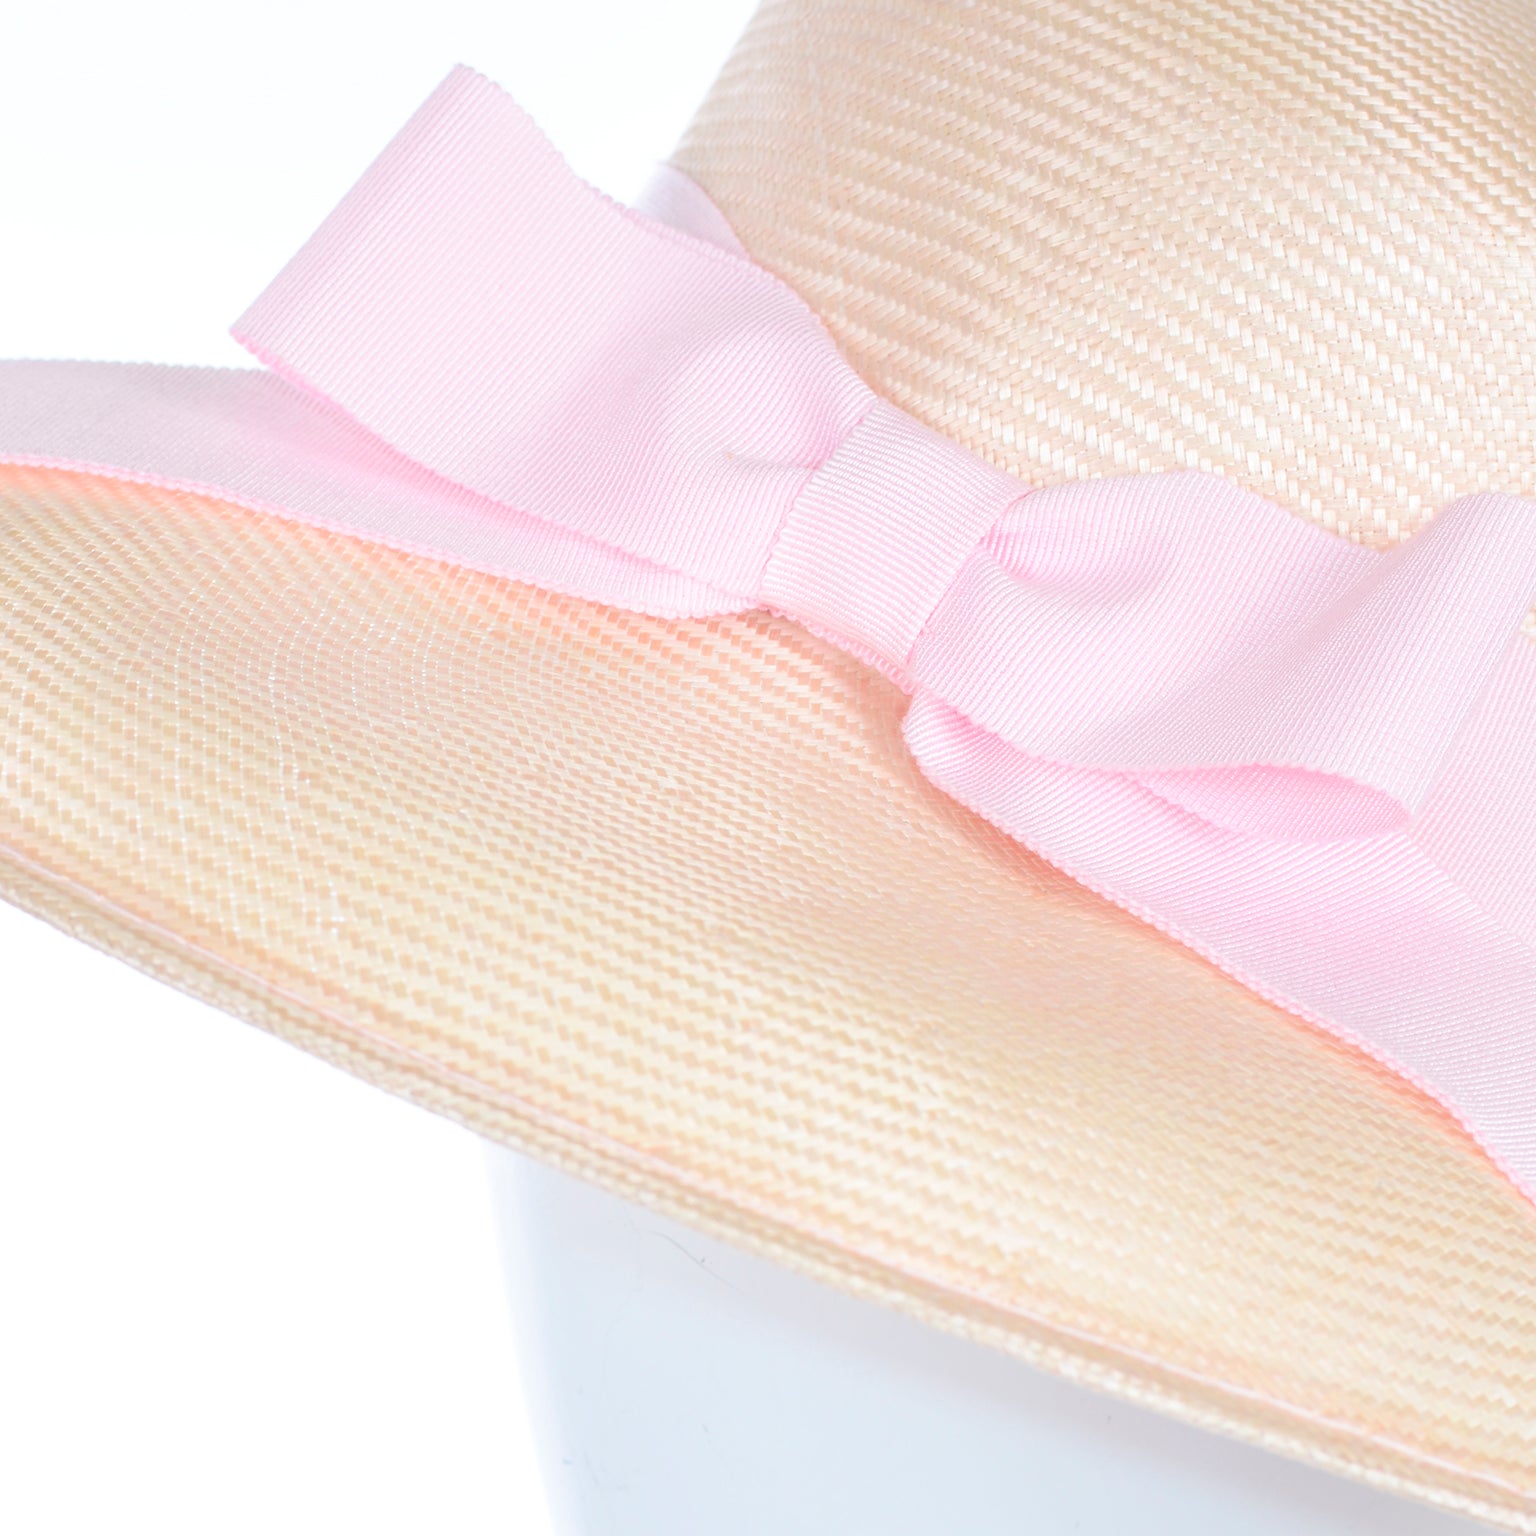 Natural Straw Bow – Rebecca Hillis Millinery